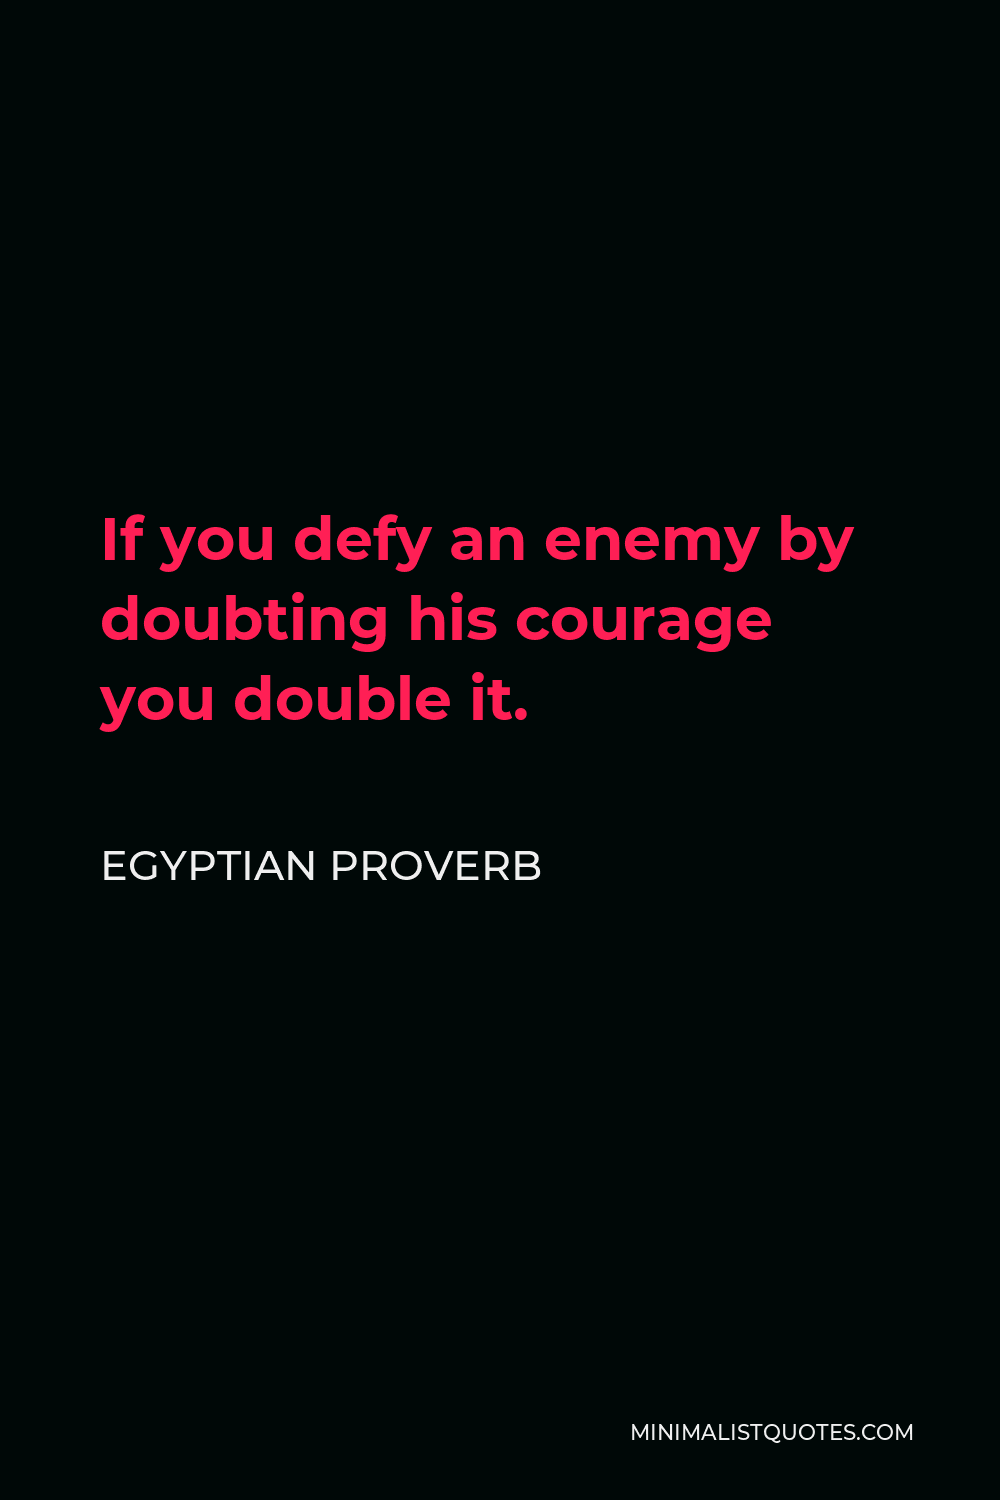 Egyptian Proverb Quote - If you defy an enemy by doubting his courage you double it.